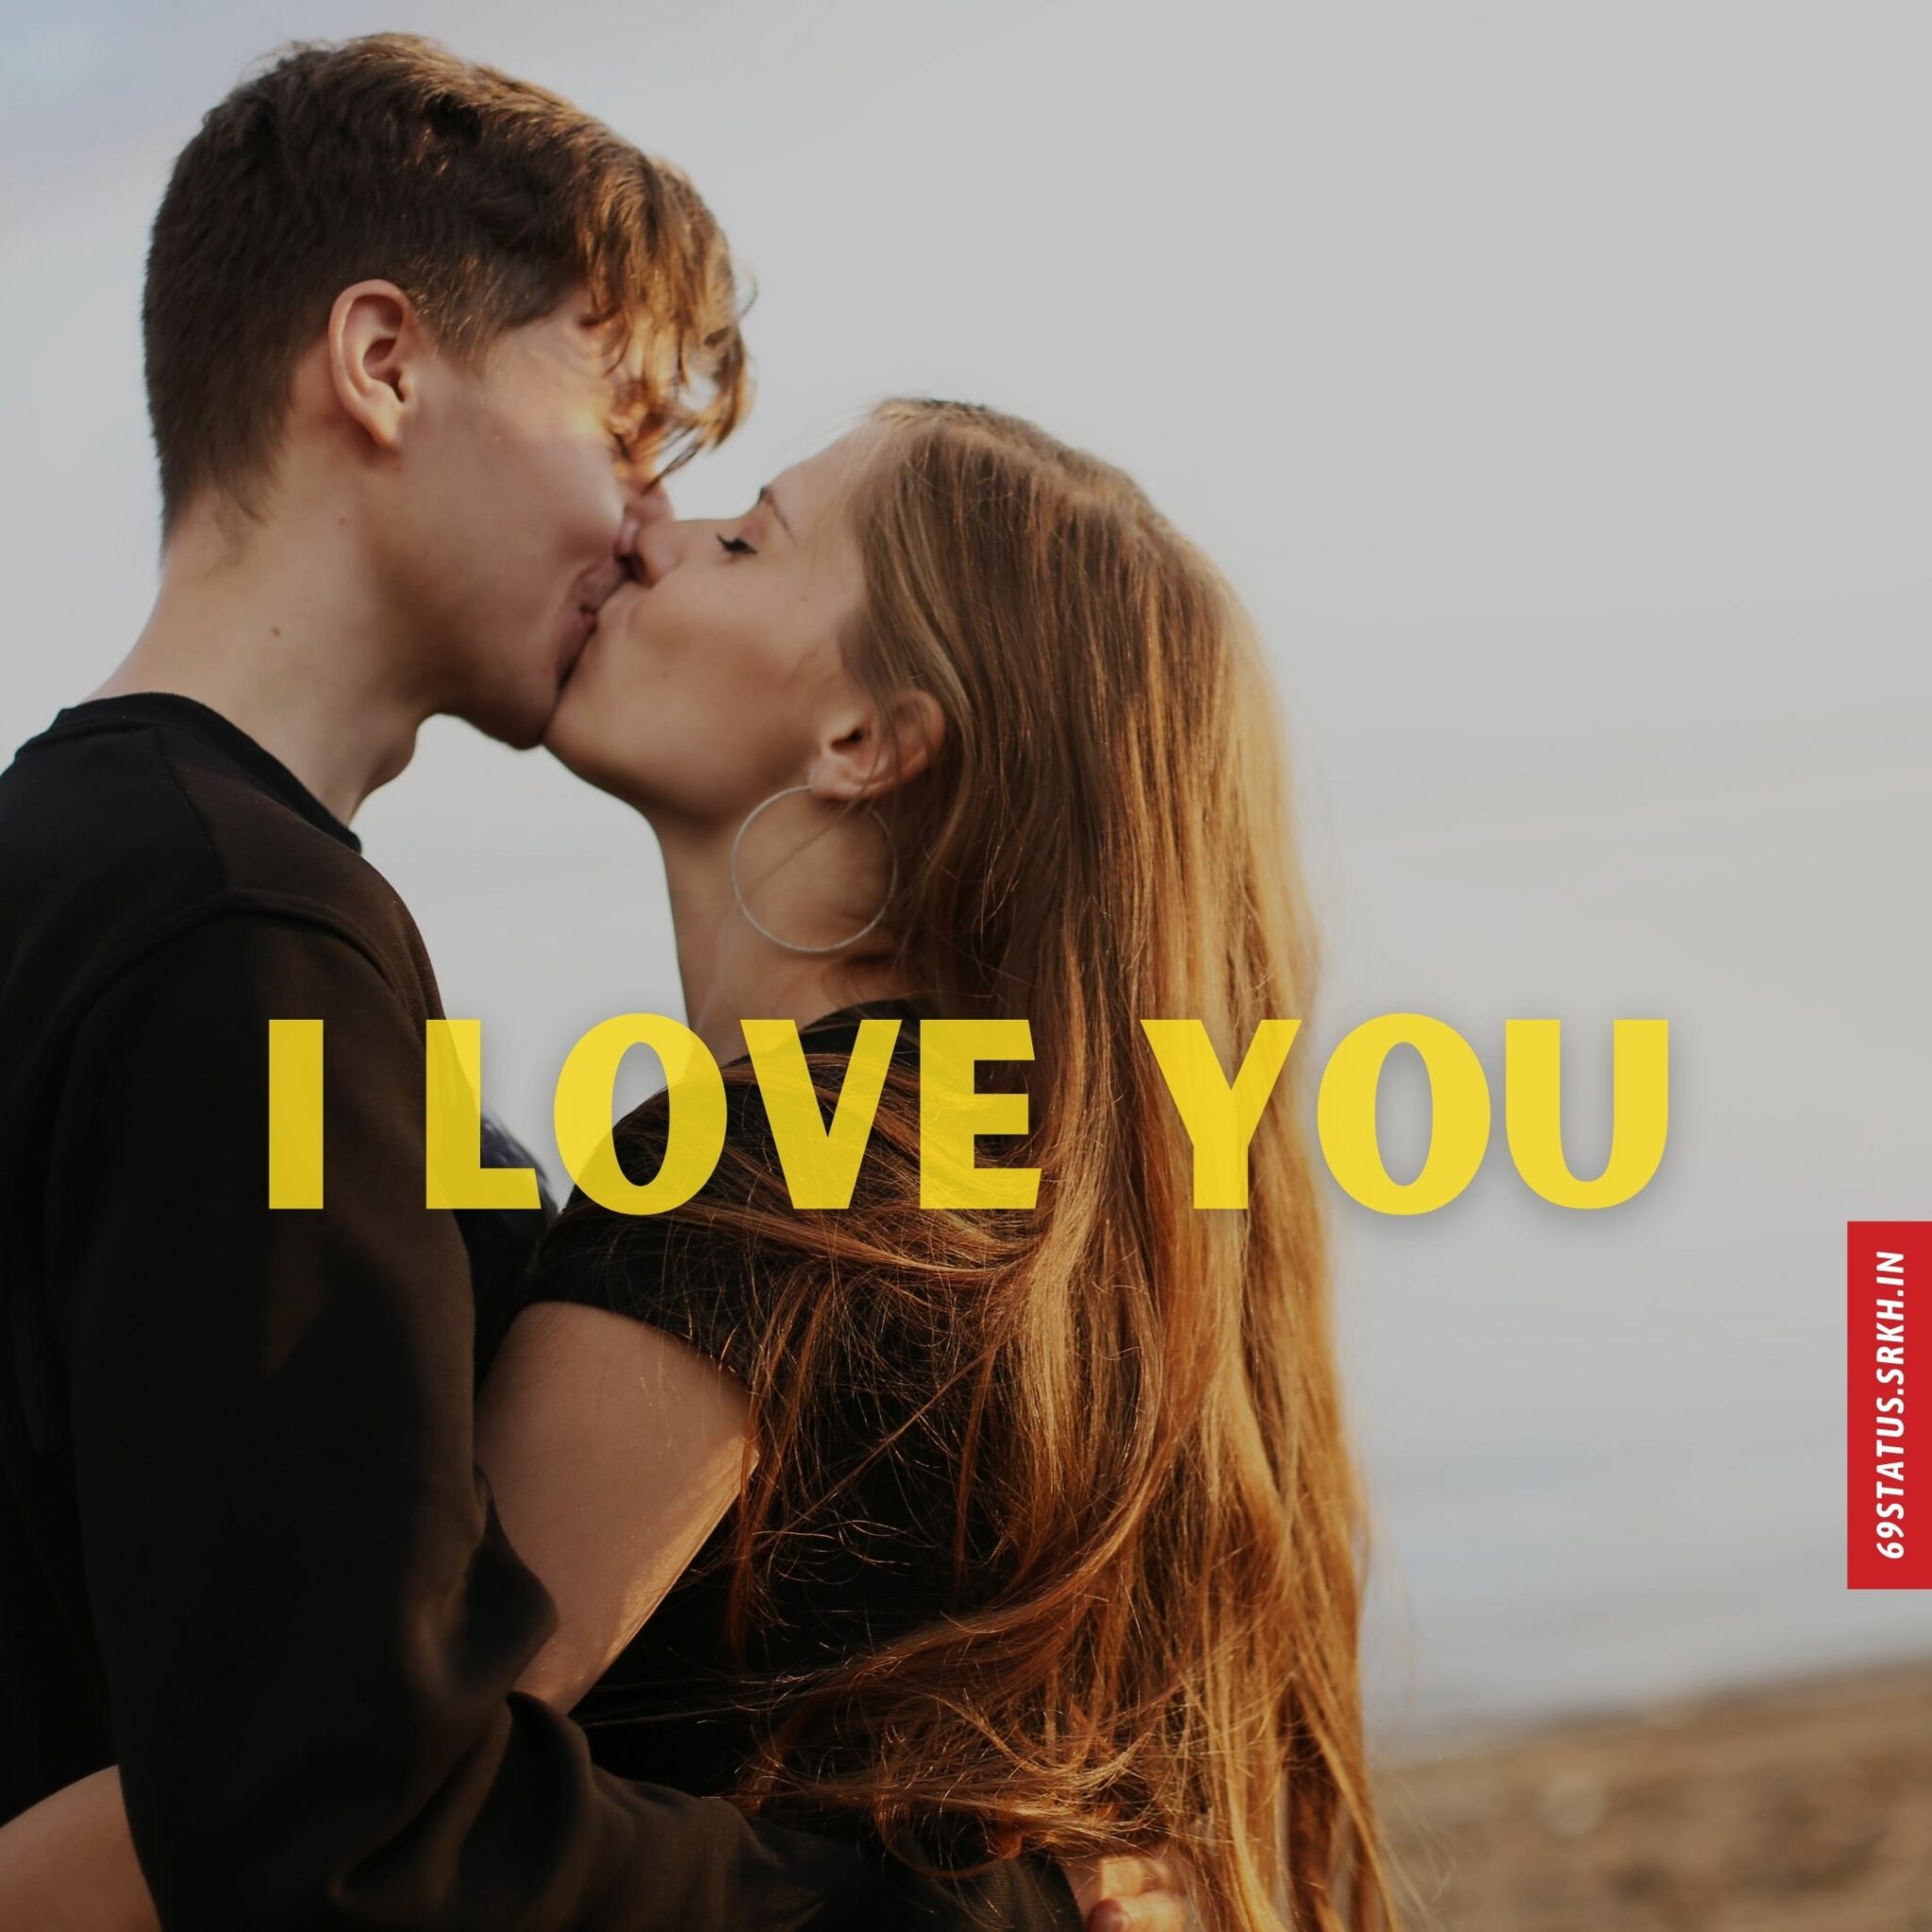 🔥 I Love You kiss images hd couples kissing Download free - Images SRkh